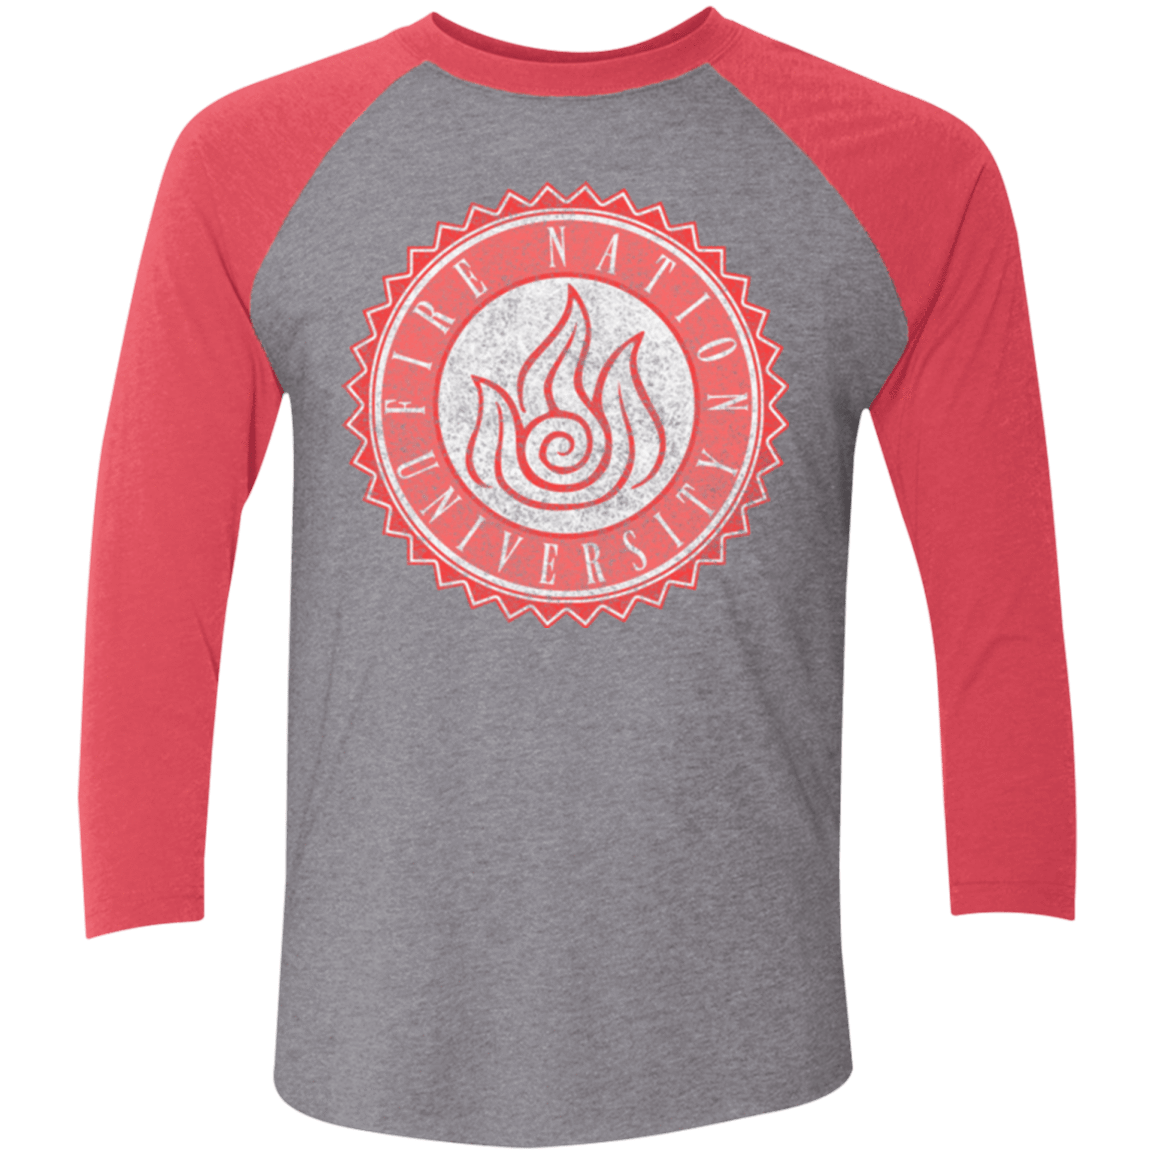 T-Shirts Premium Heather/ Vintage Red / X-Small Fire Nation Univeristy Triblend 3/4 Sleeve